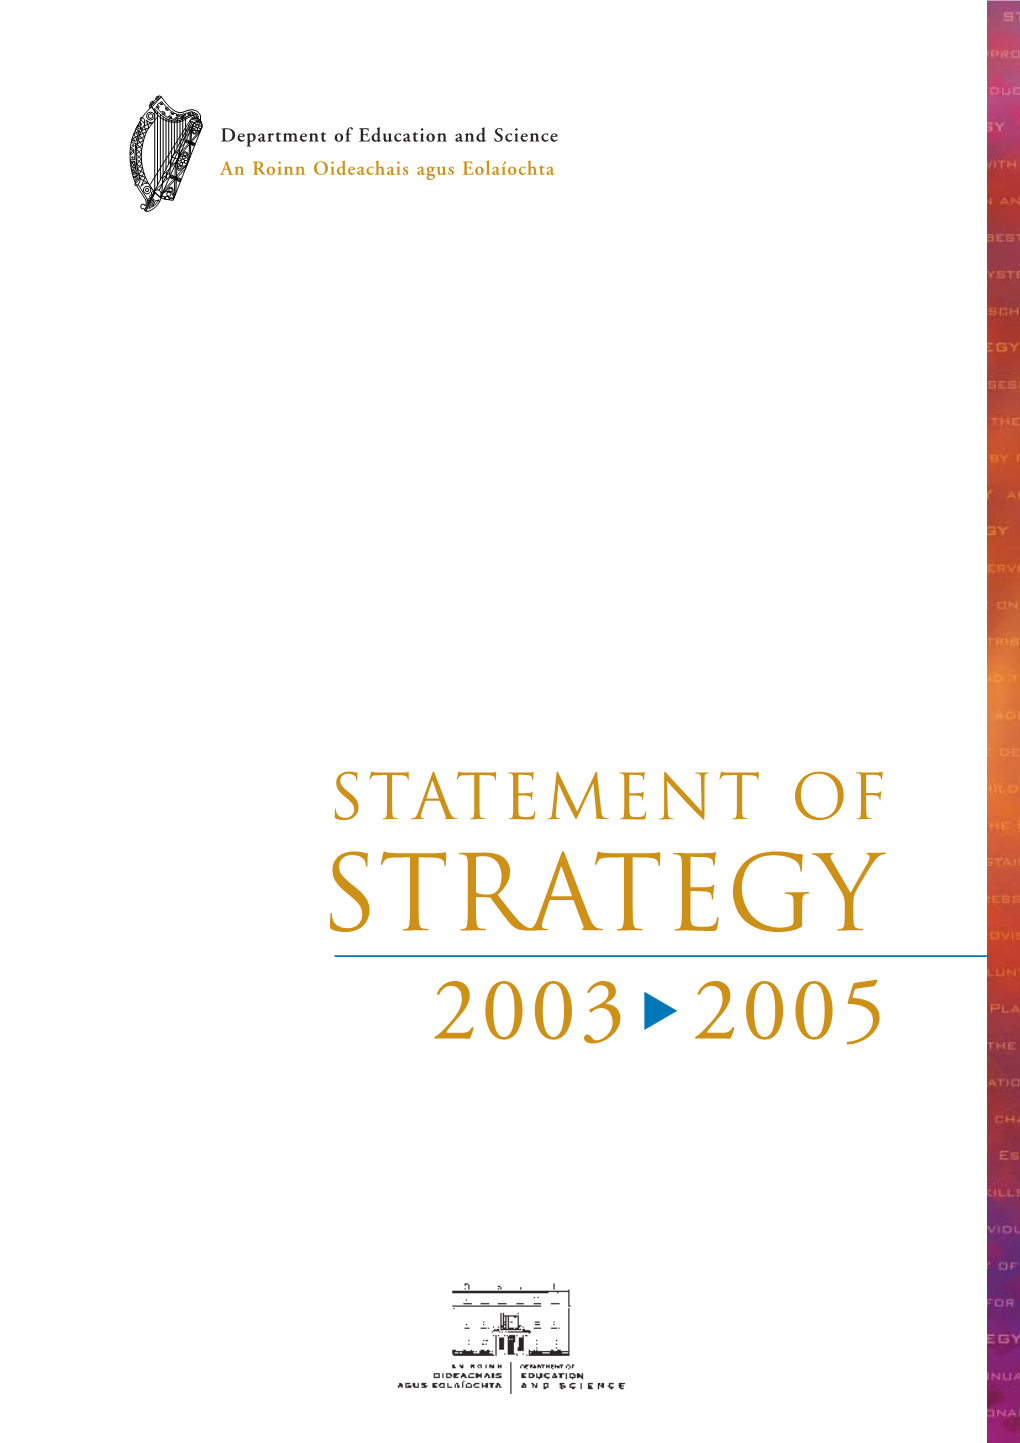 Department of Education and Science Statement of Strategy 2003-2005